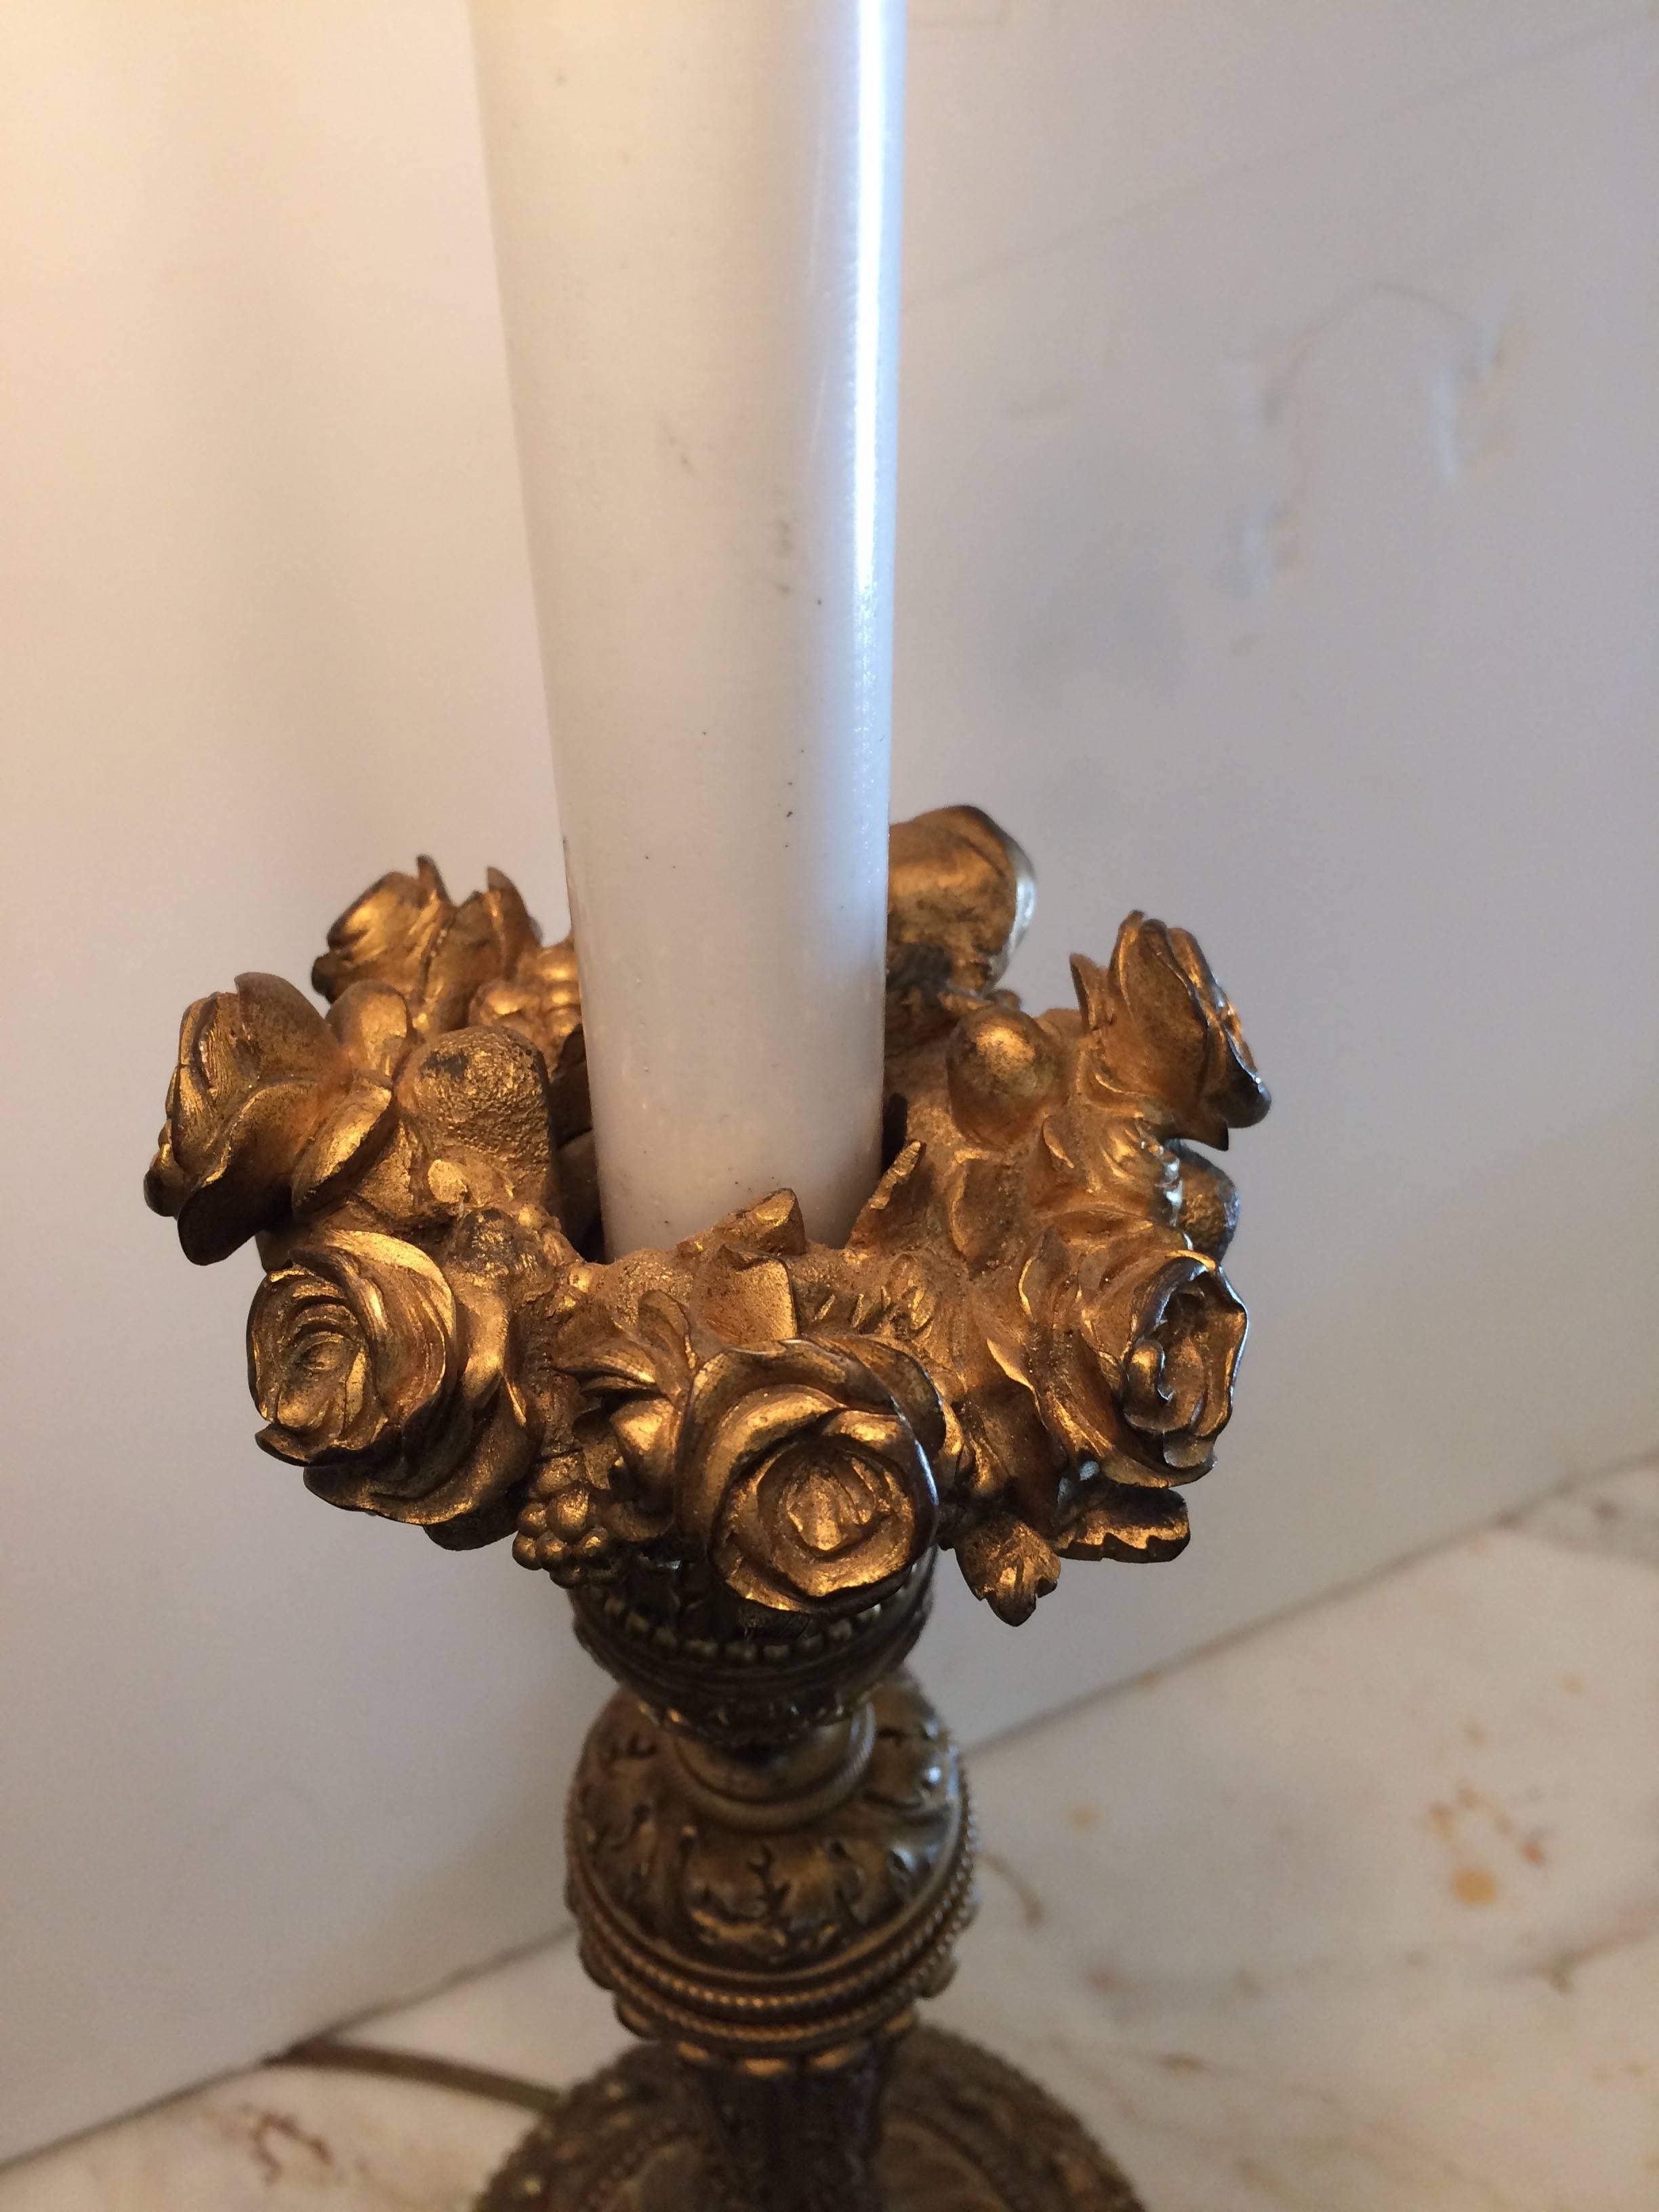 Romantic bronze candlestick lamp having ornate roses in a circle at the top and gorgeous decoration overall, topped with a wonderful tole lampshade and acorn finial with arrow.